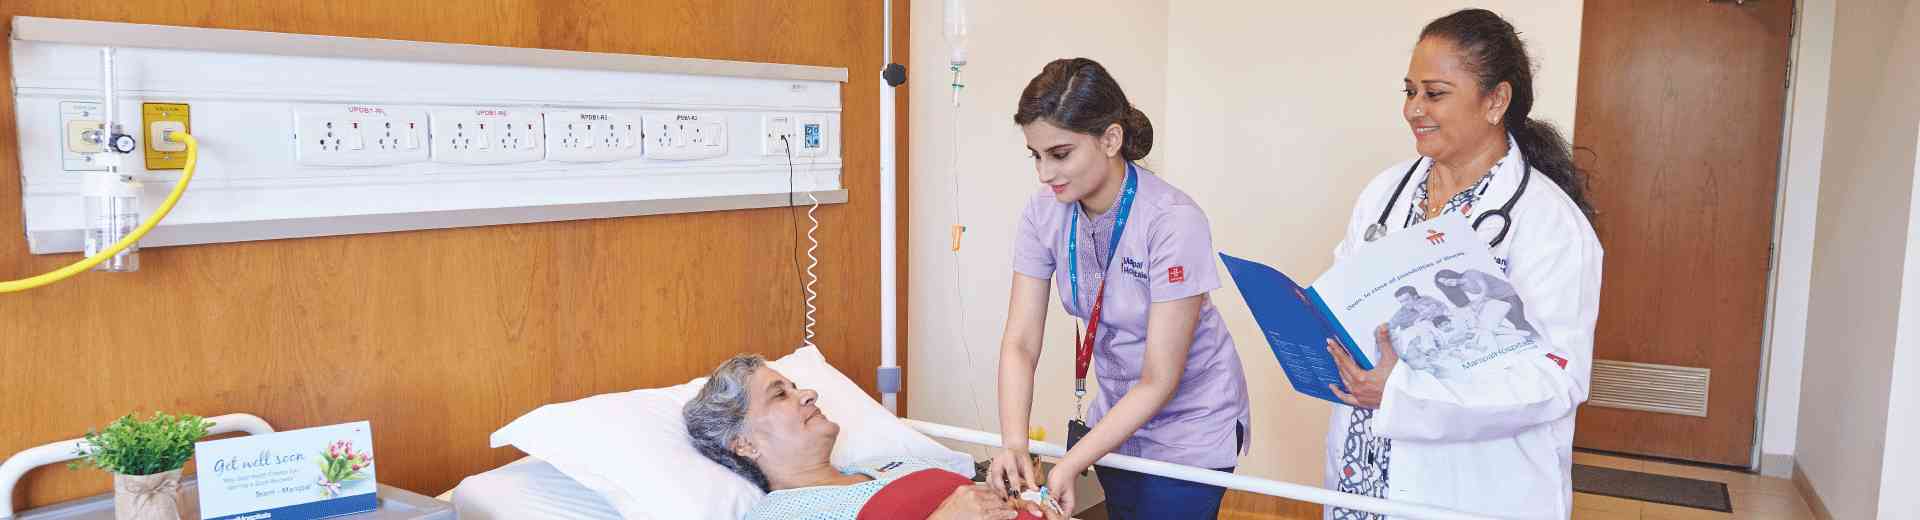 Outpatient and In-patient services in Gurugram